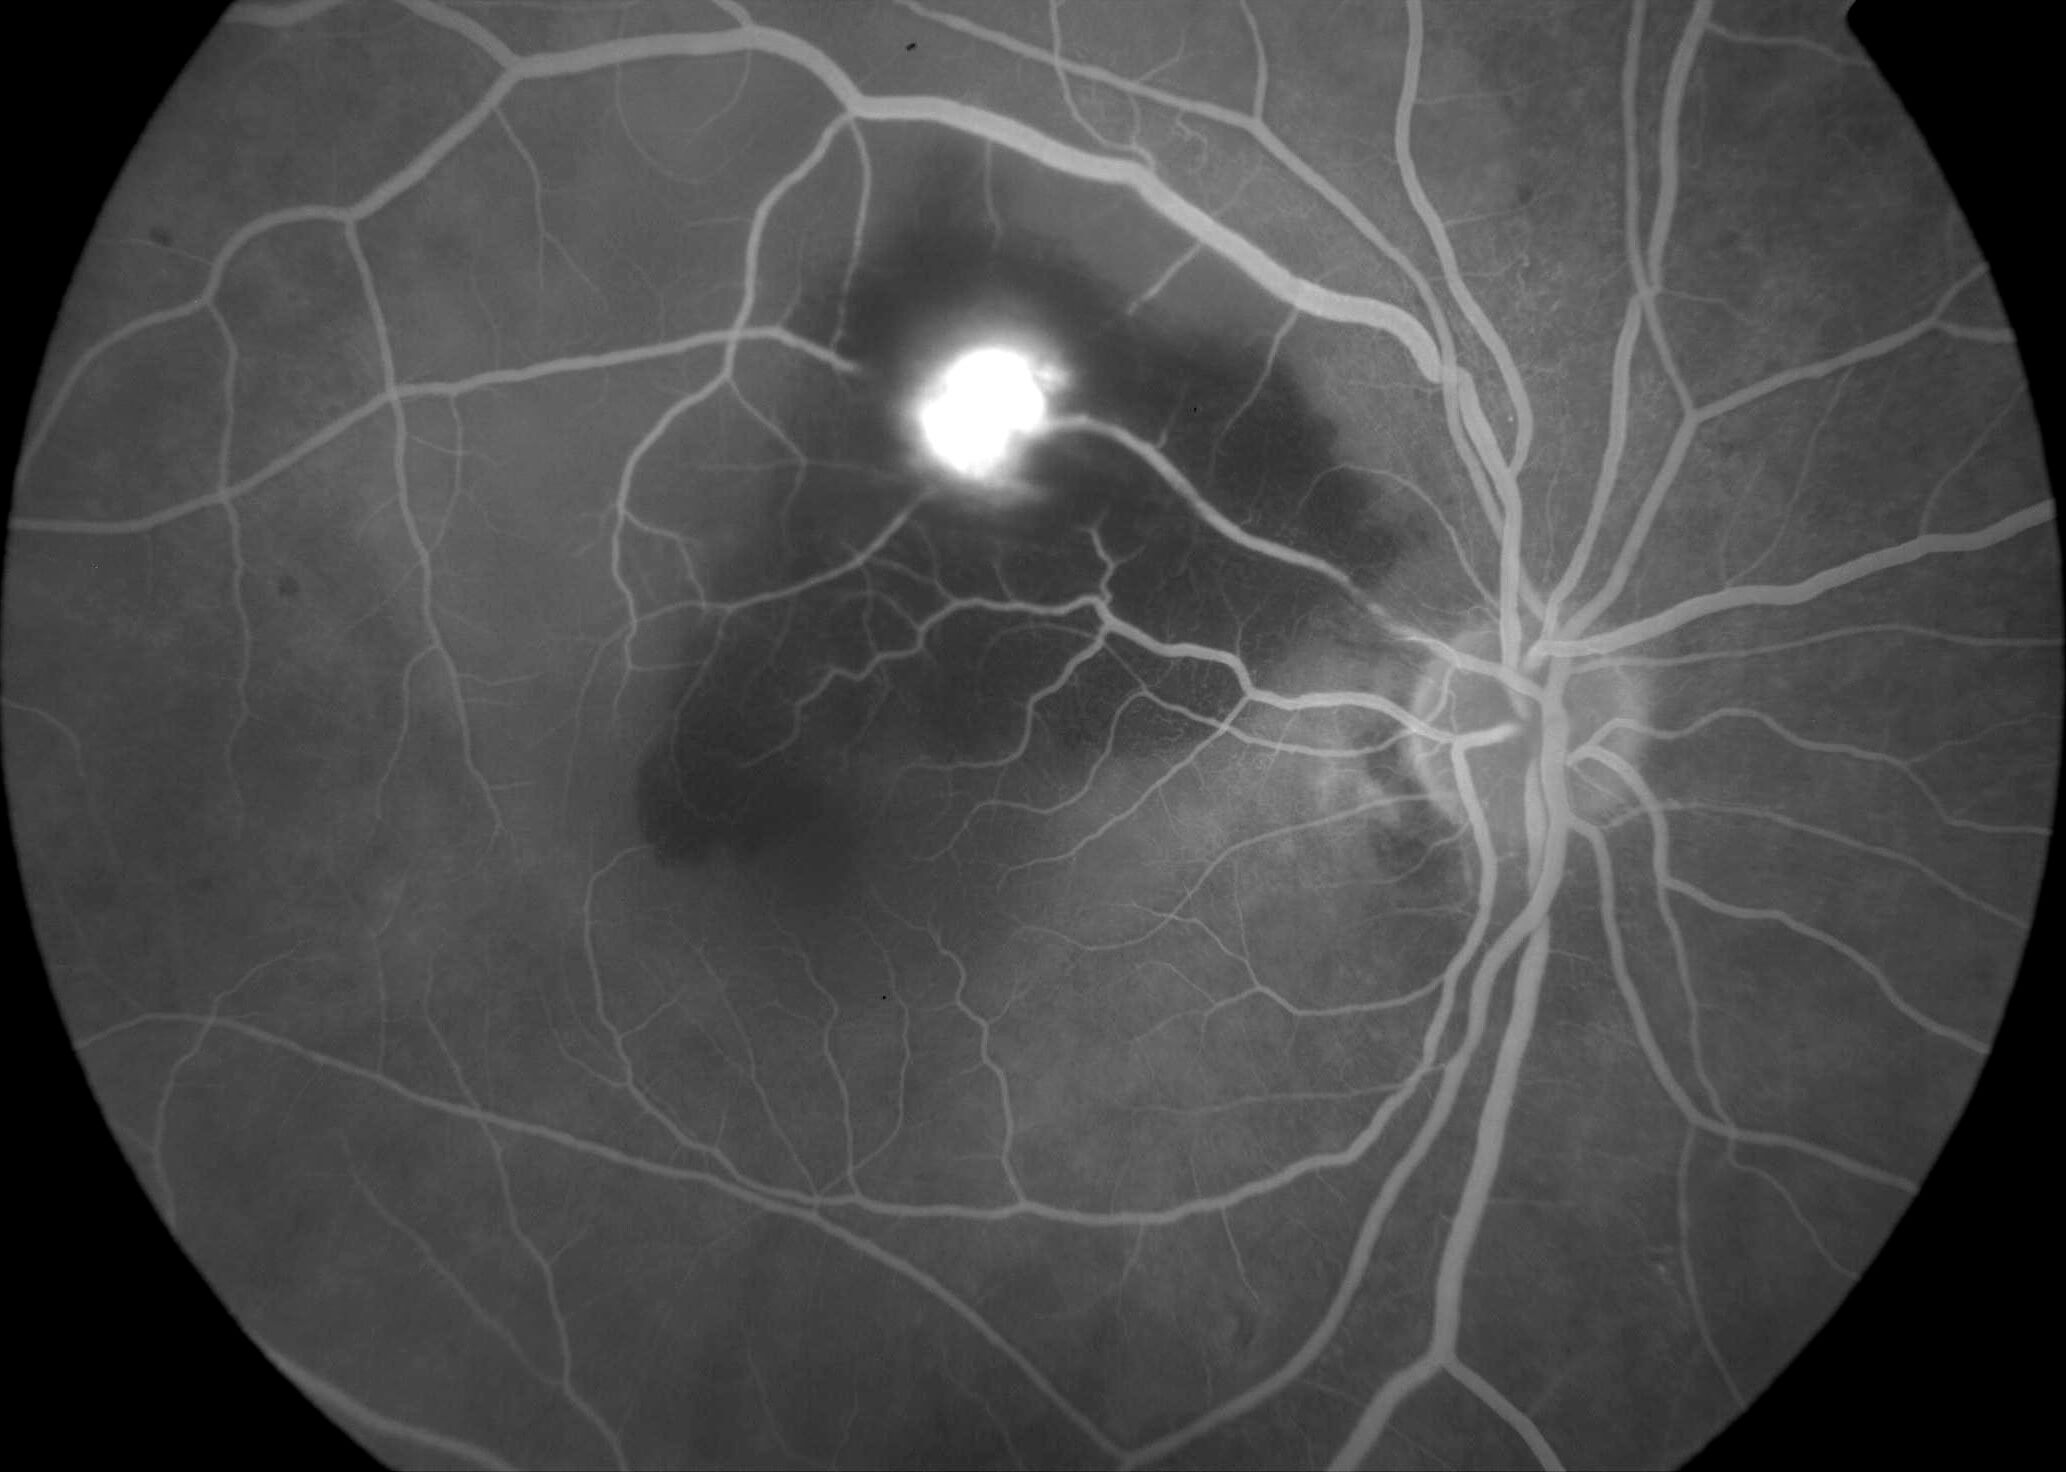 Right fundus fluorescein angiography demonstrates a leaking saccular retinal artery macroaneurysm at the centre of the multilayered retinal hemorrhage.